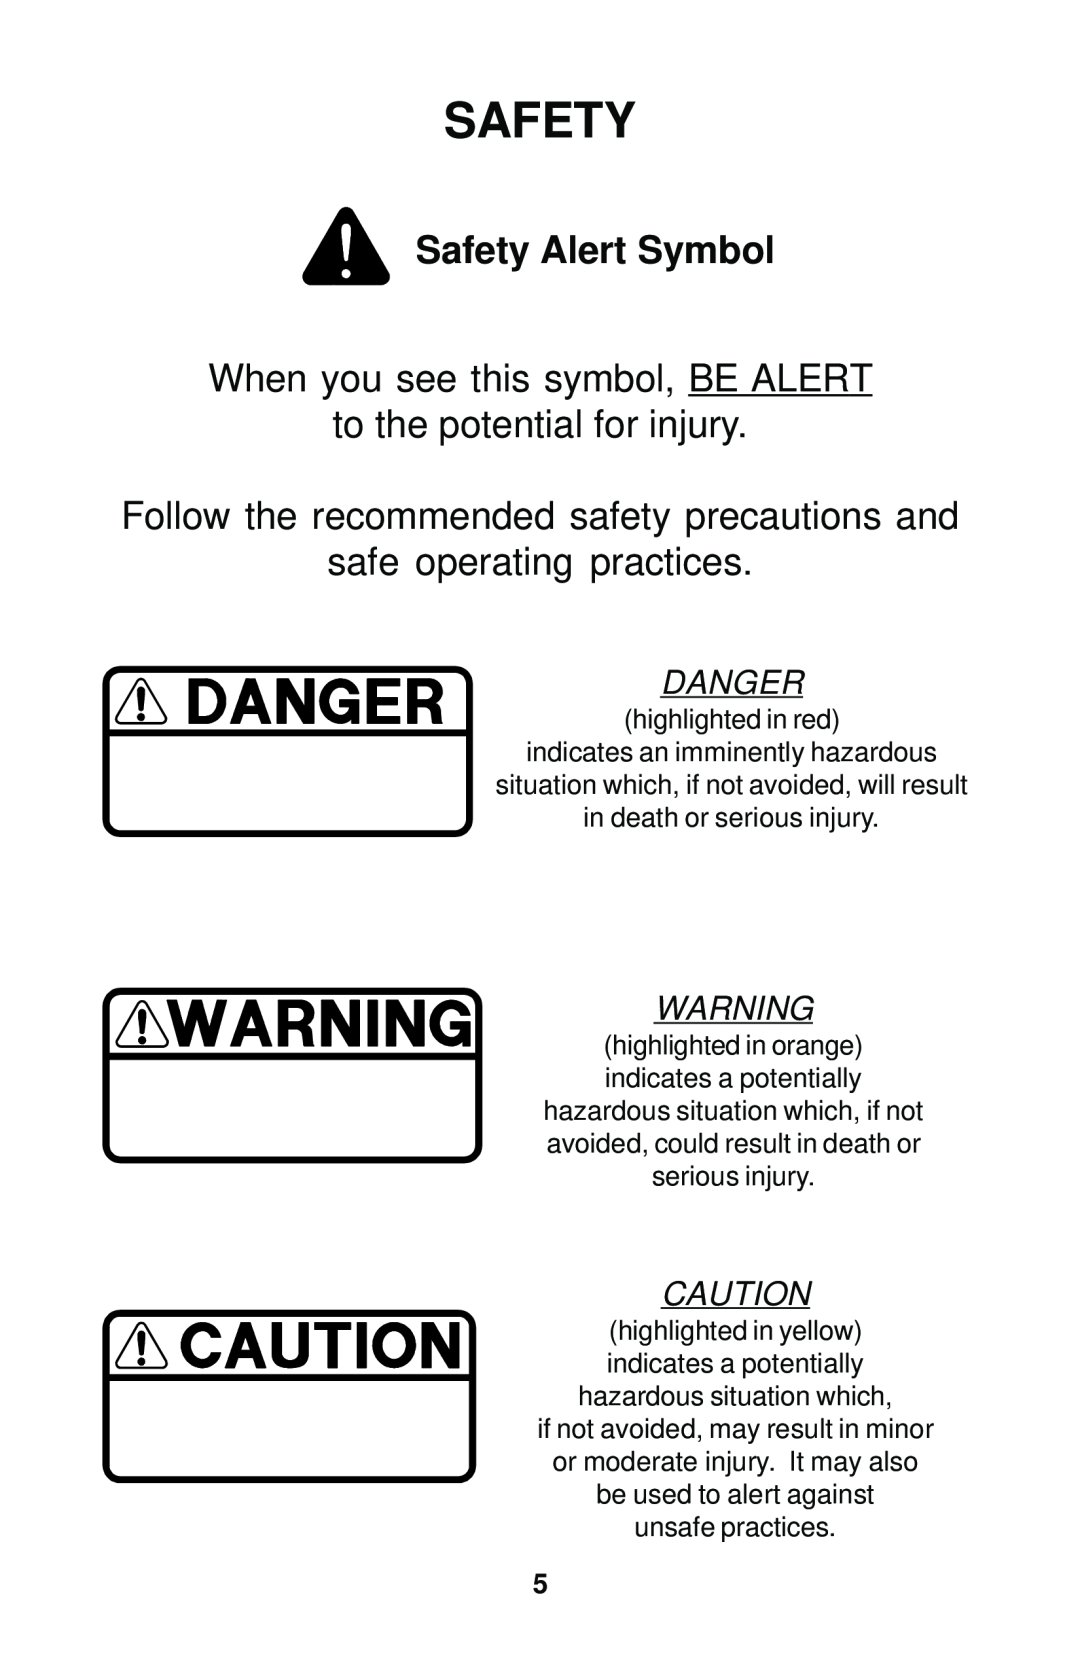 Dixon 12881-1104 manual Safety Alert Symbol, When you see this symbol, BE ALERT to the potential for injury 